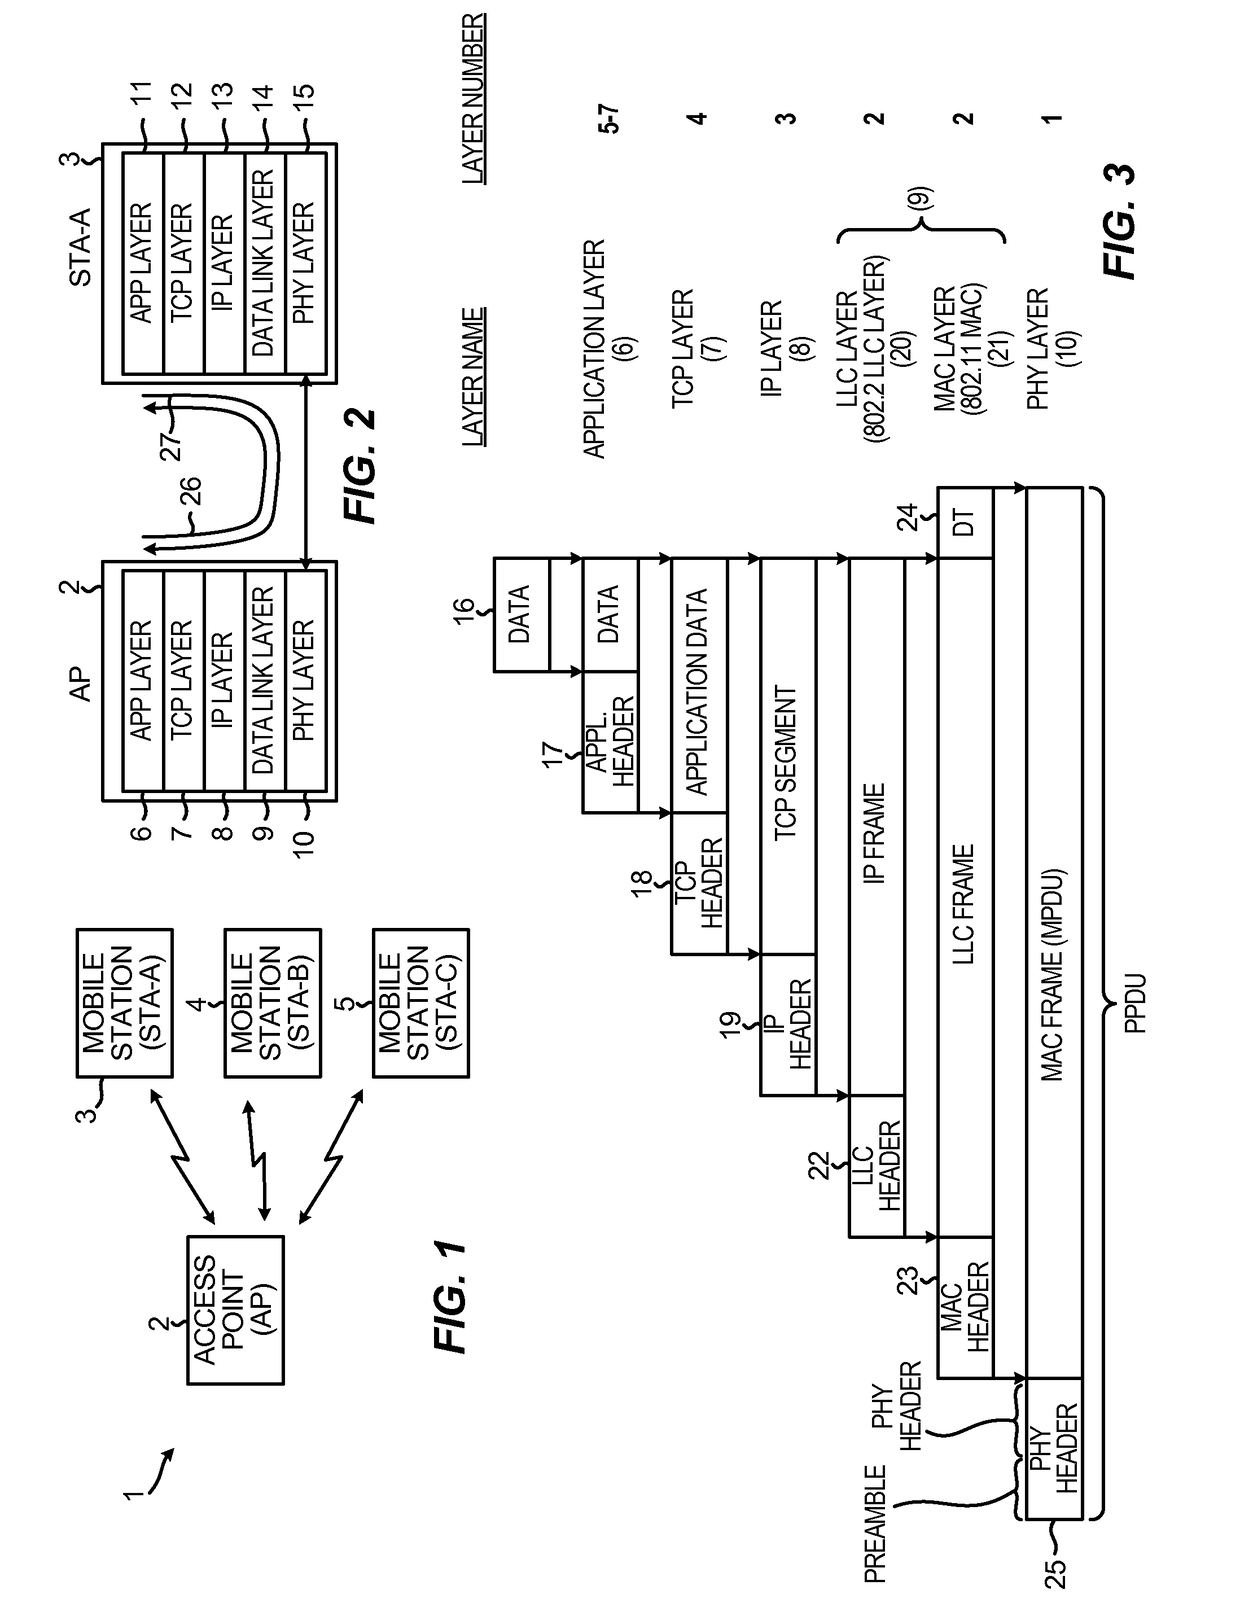 Packet-level erasure protection coding in aggregated packet transmissions